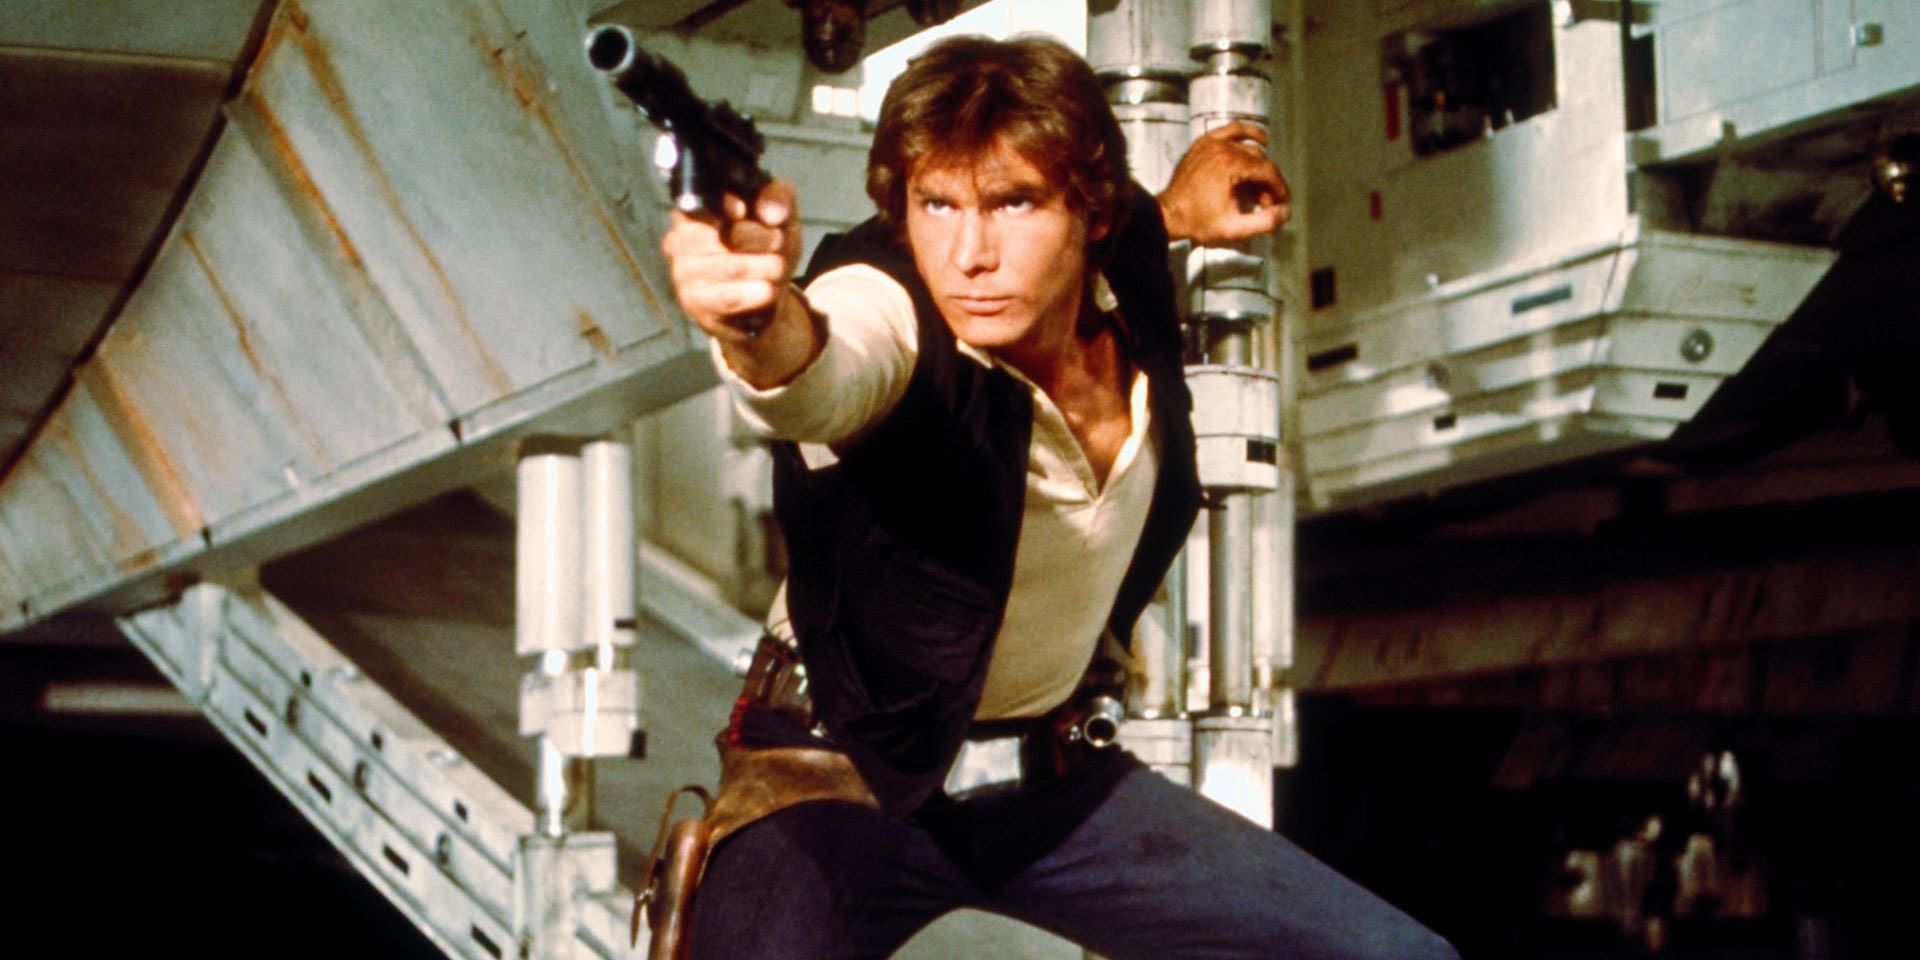 Han Solo in Star Wars with a Blaster